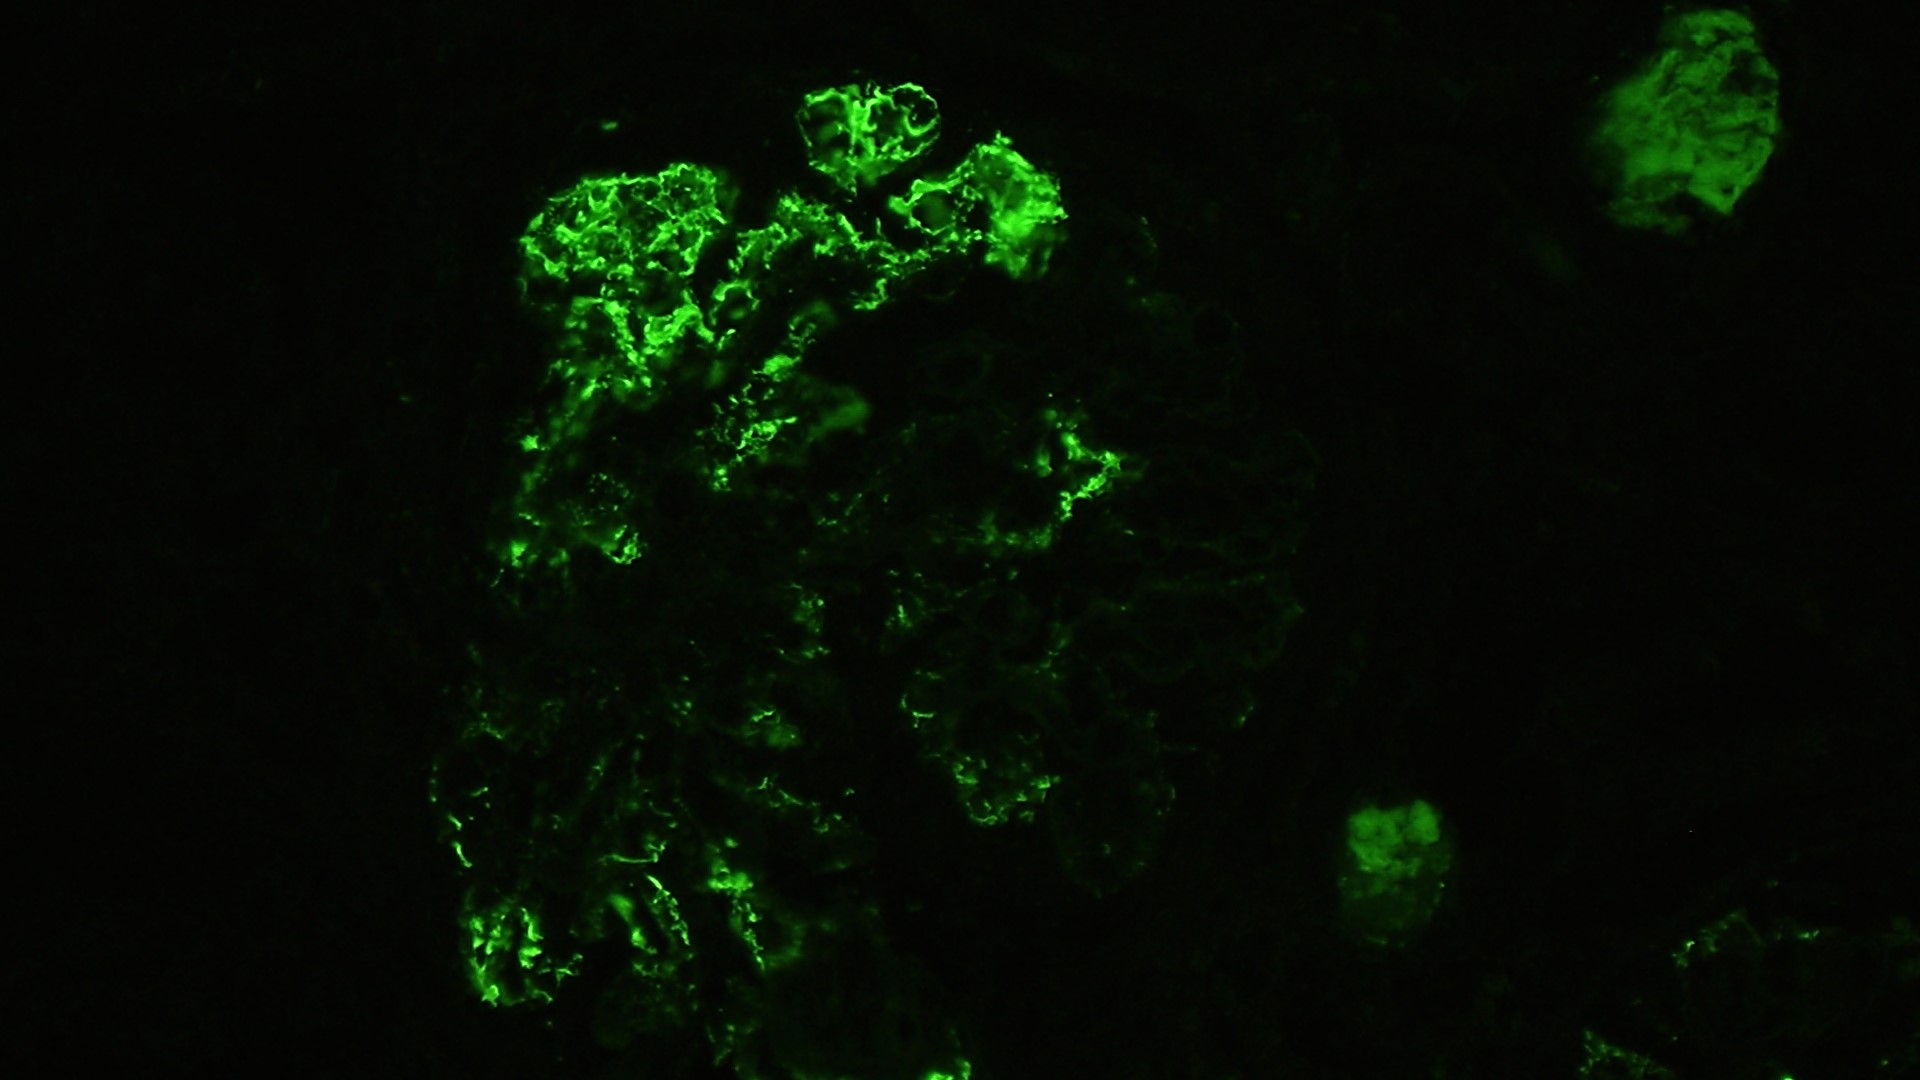 positive staining only for IgG1 and kappa light chai